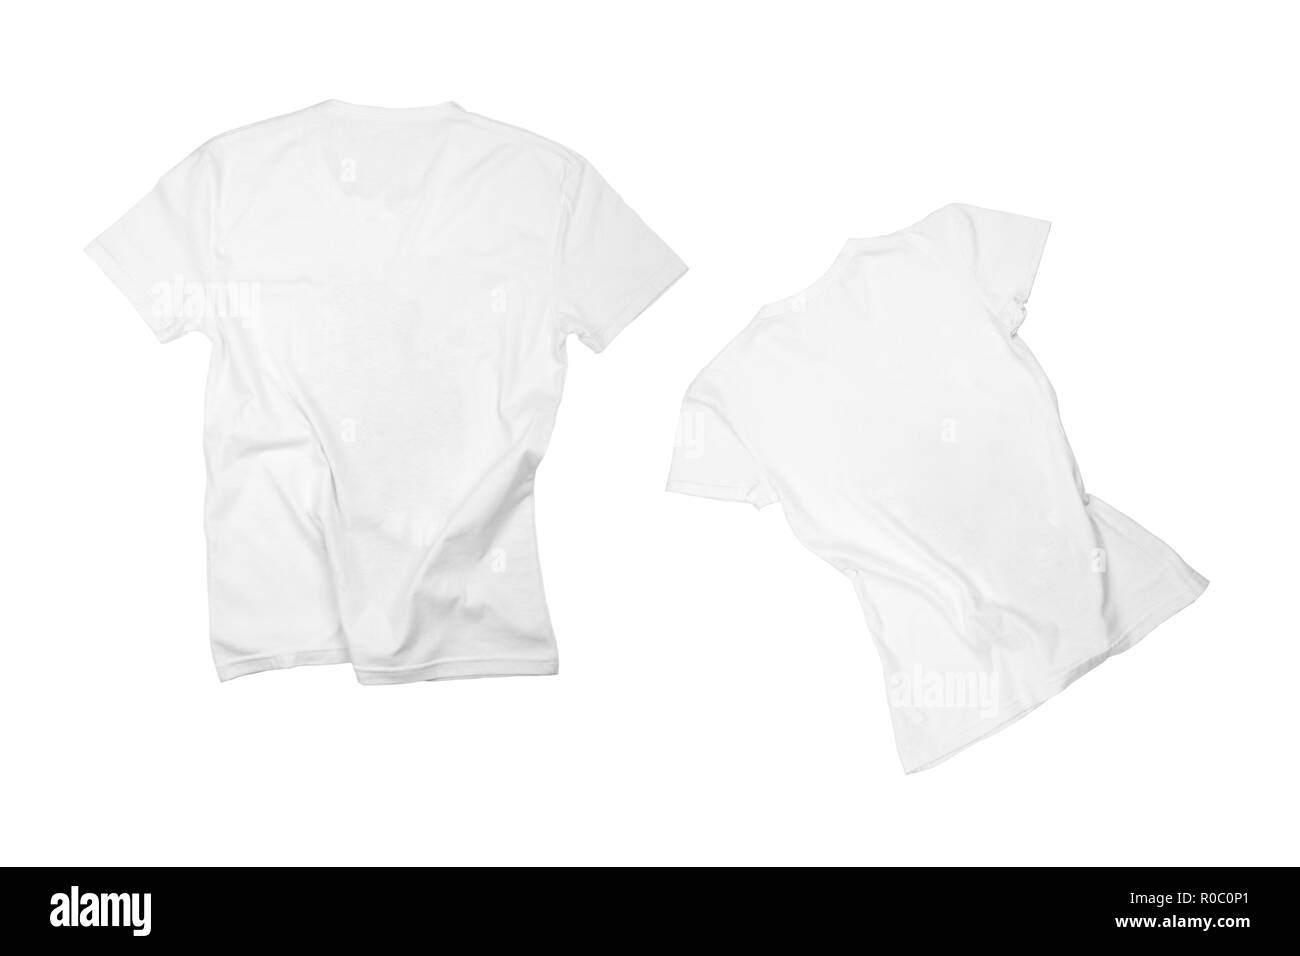 Wearing white t shirts Black and White Stock Photos & Images - Alamy